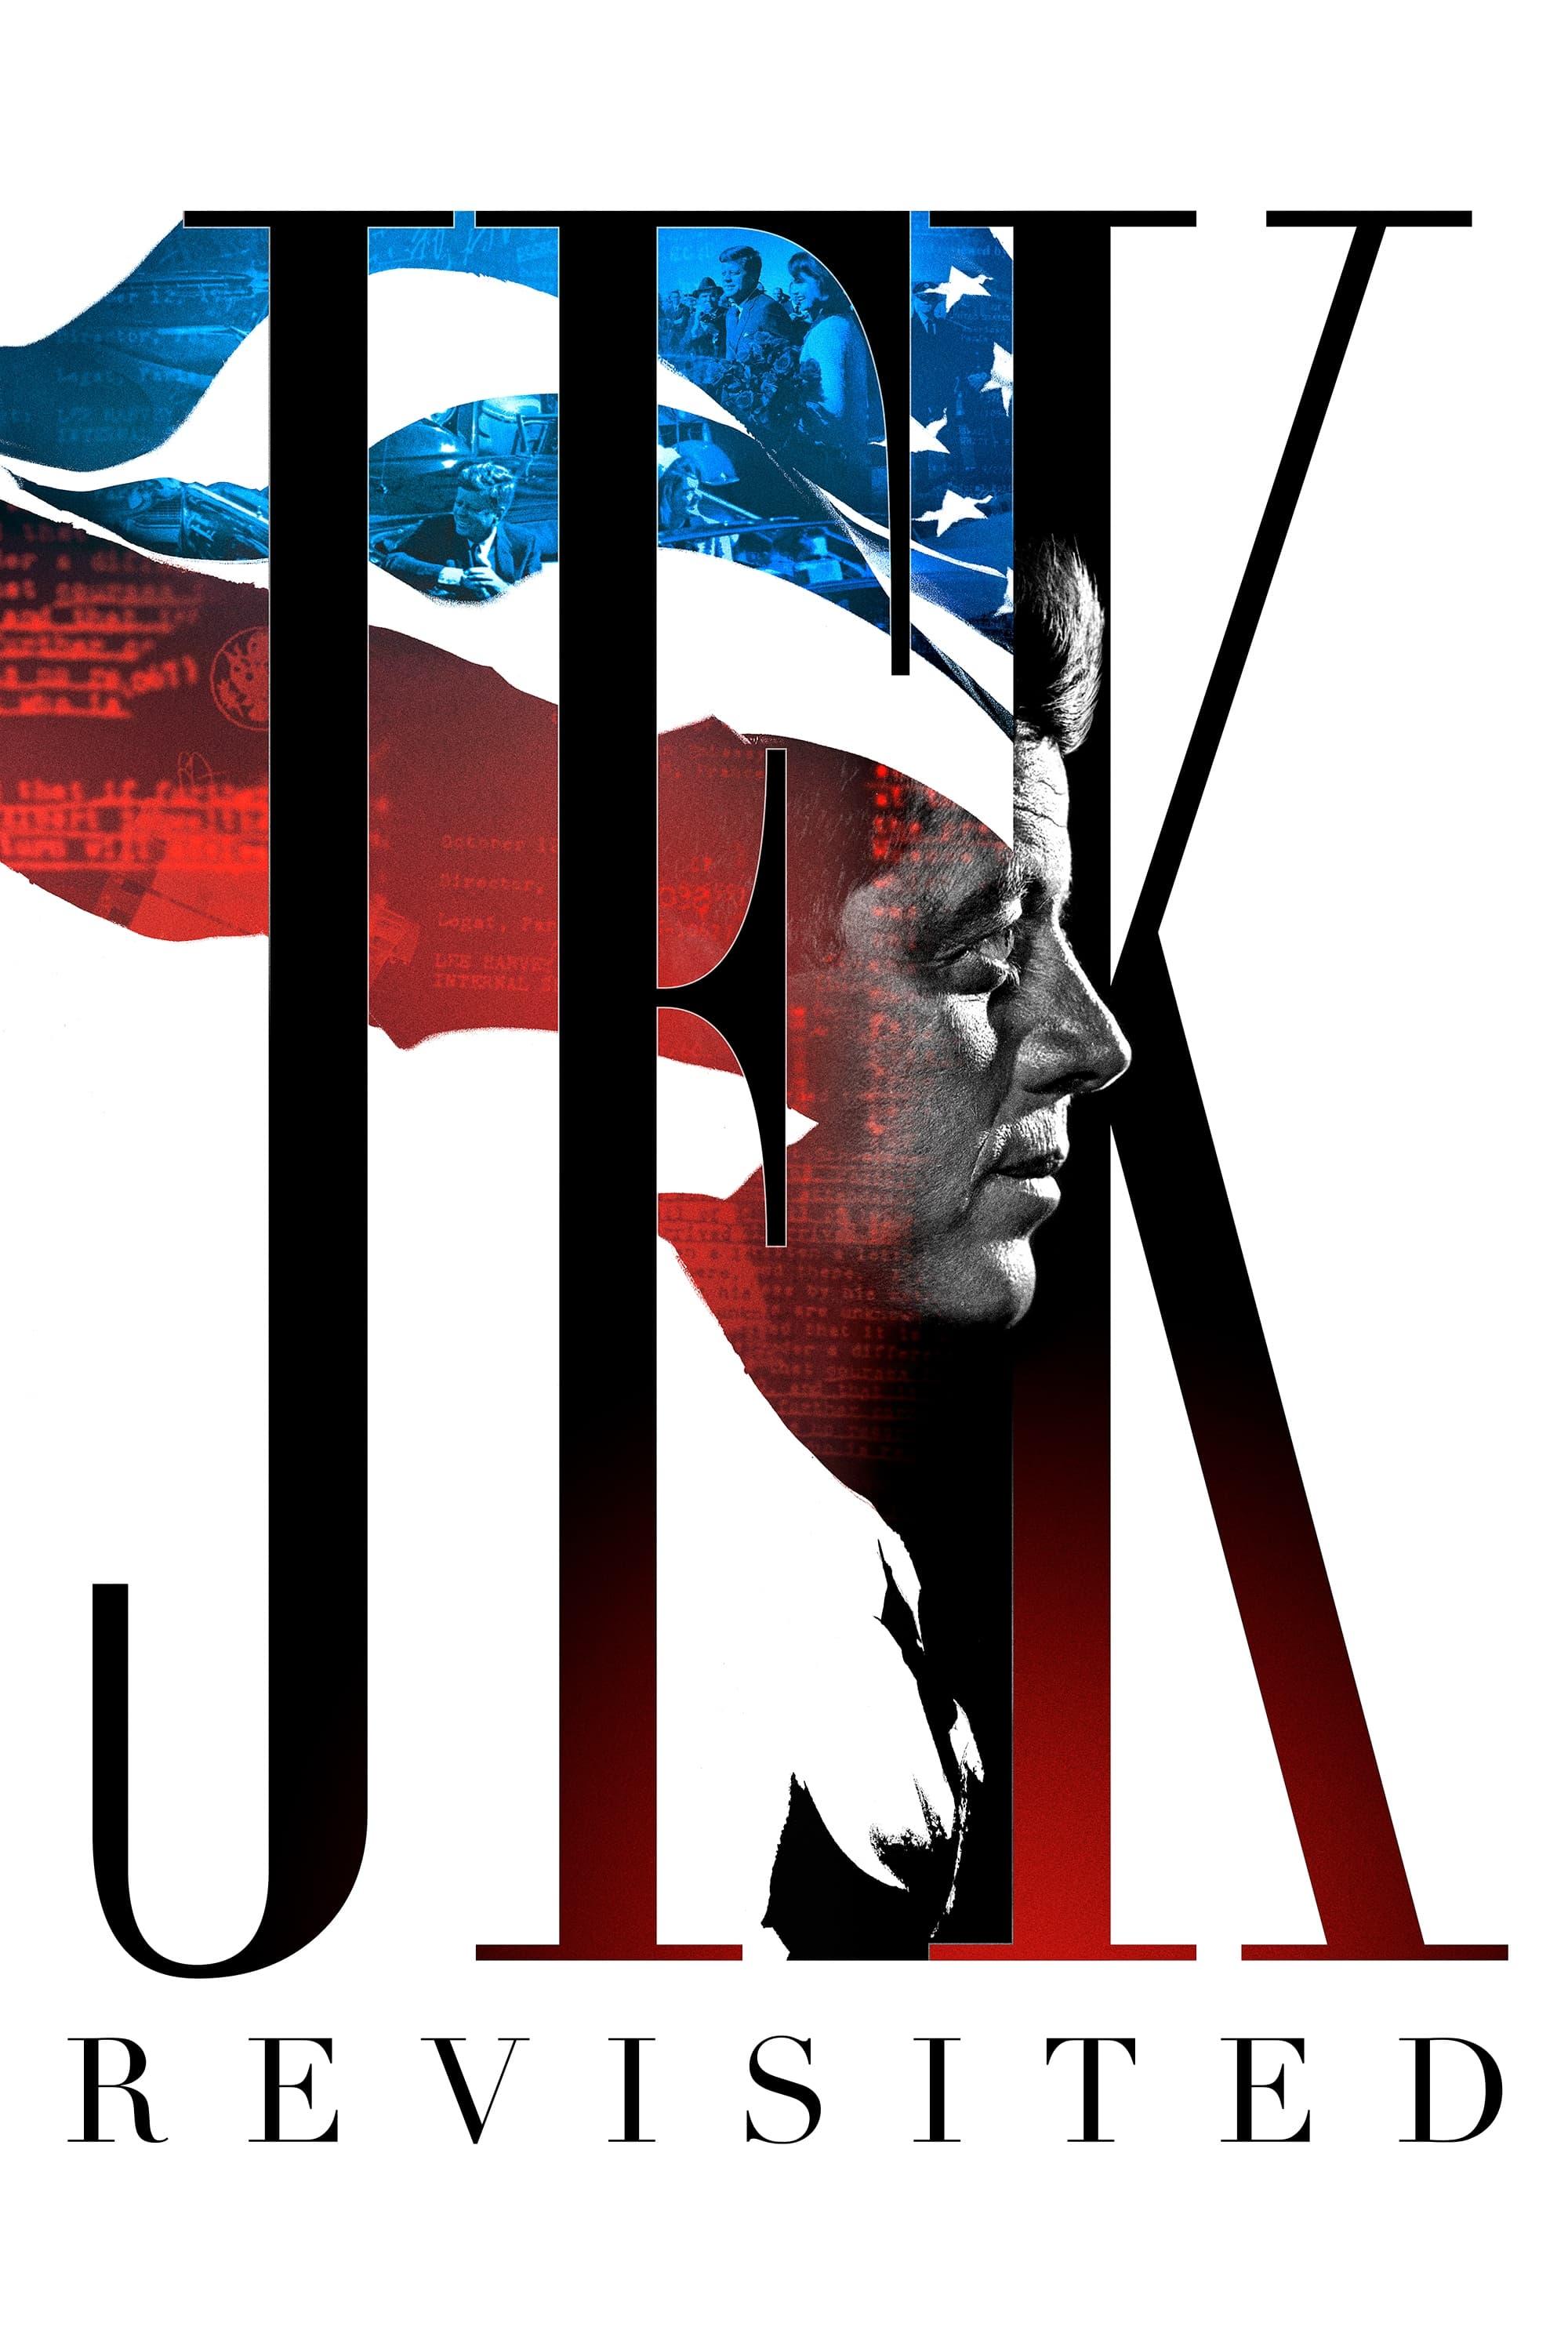 JFK Revisited: Through the Looking Glass poster